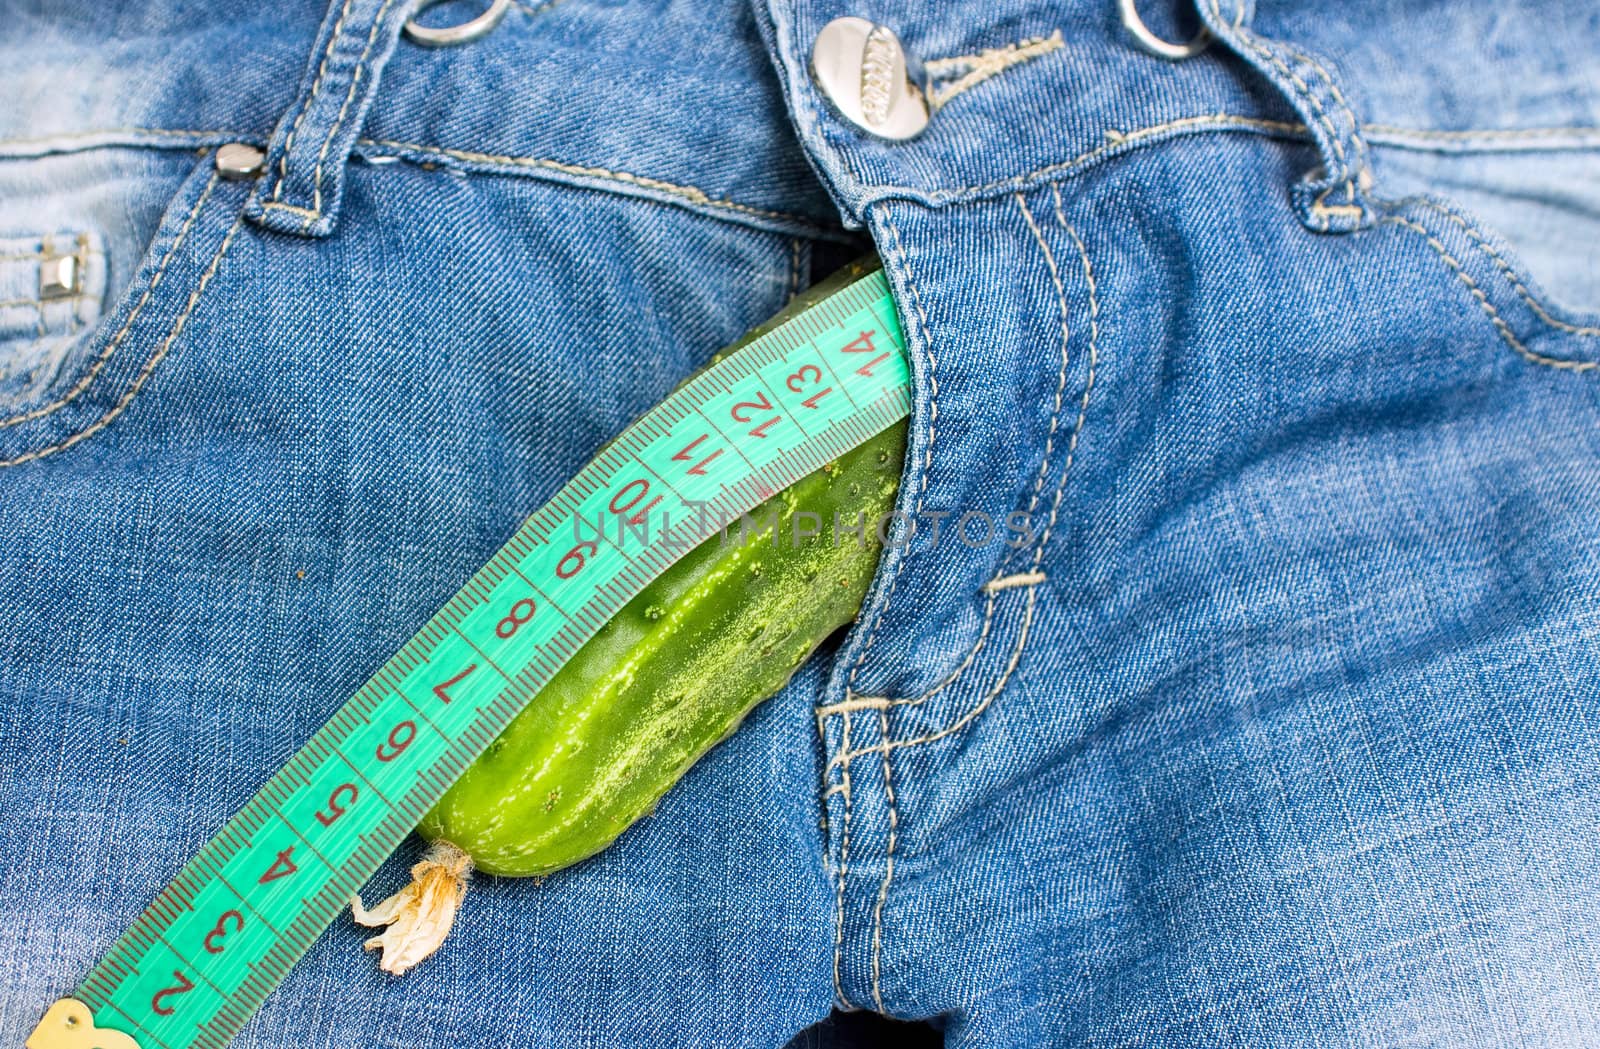 Jeans and cucumber